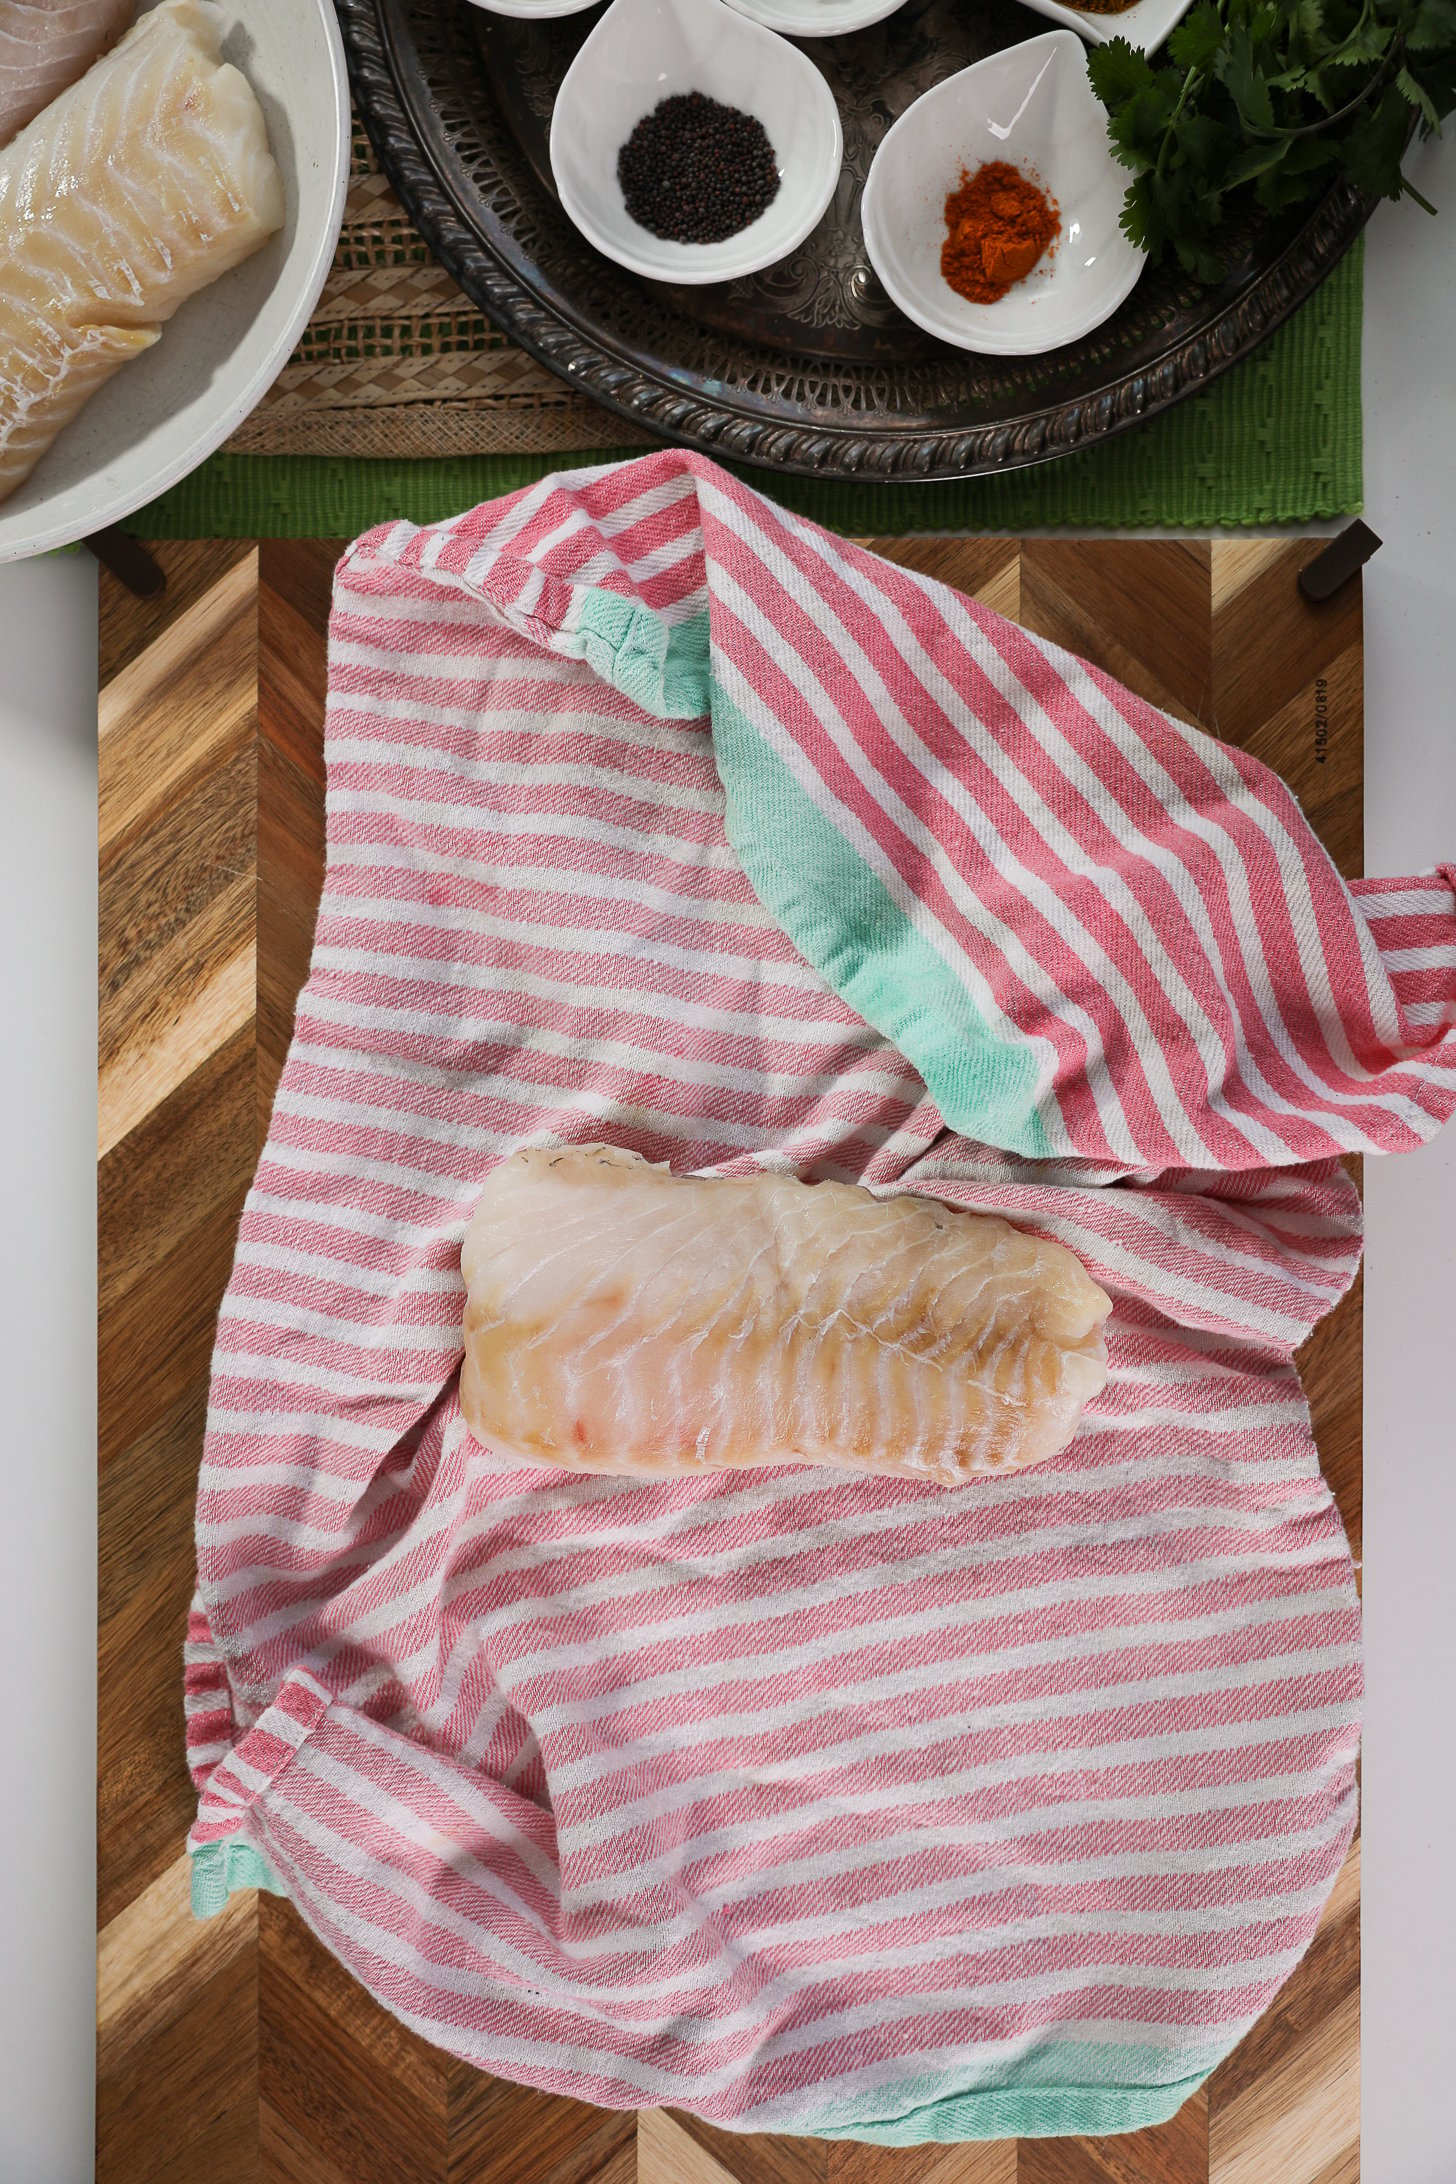 A large fish fillet placed on a kitchen towel on a wooden board.